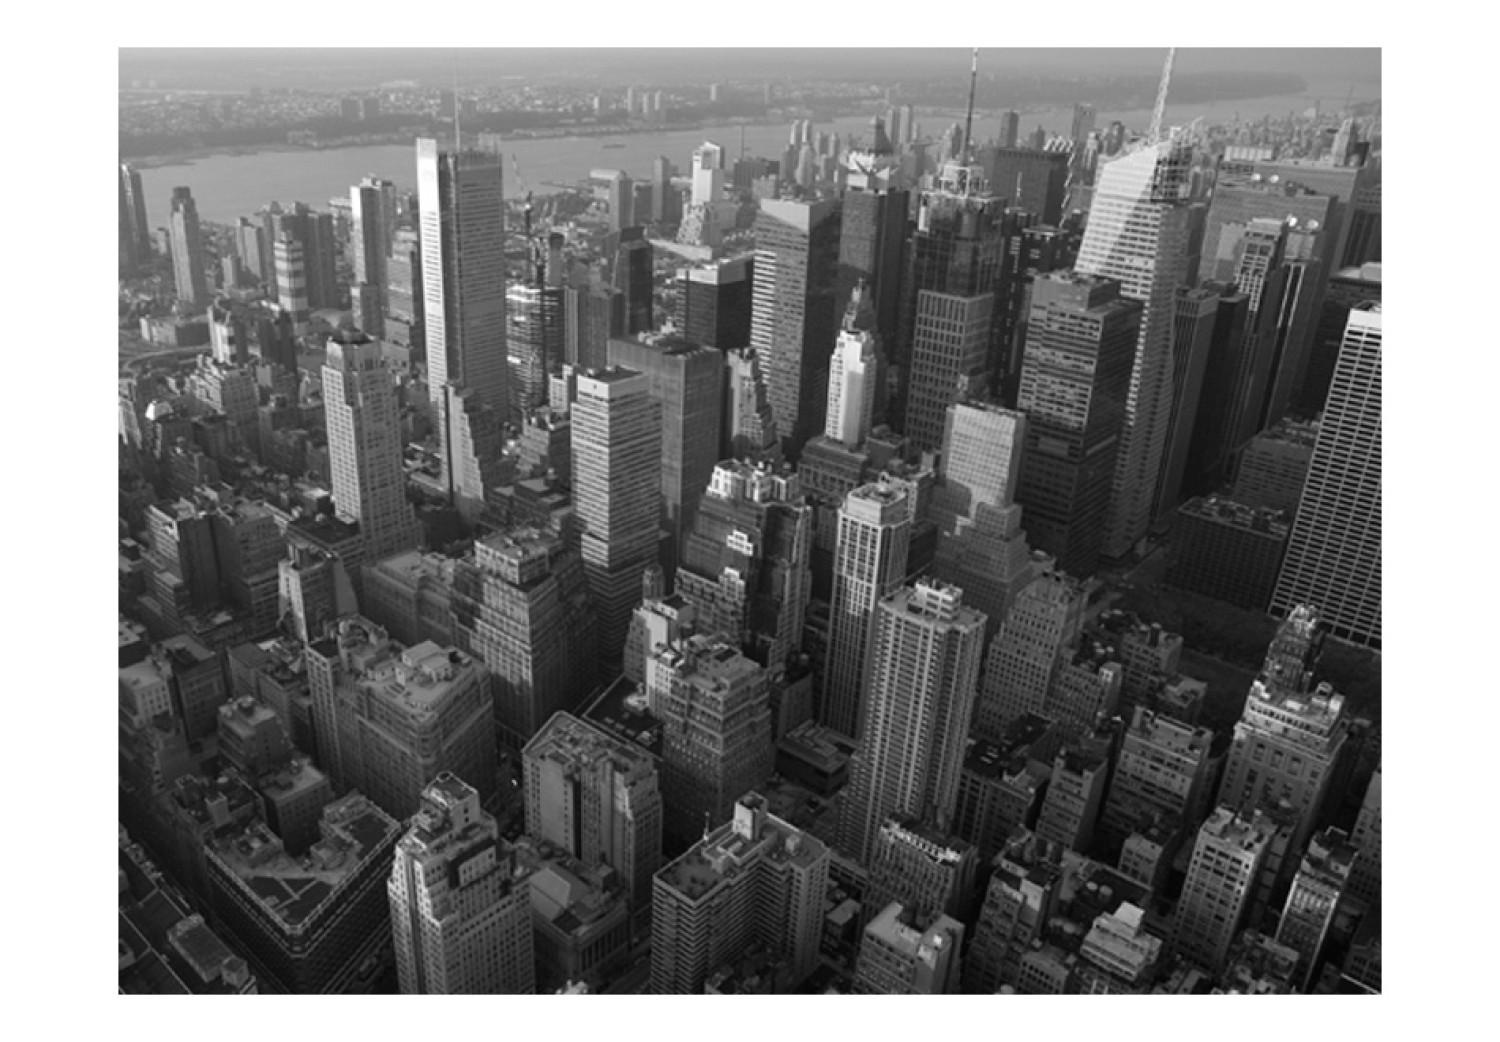 Wall Mural Bird's Eye View of New York - City Architecture in Shades of Gray